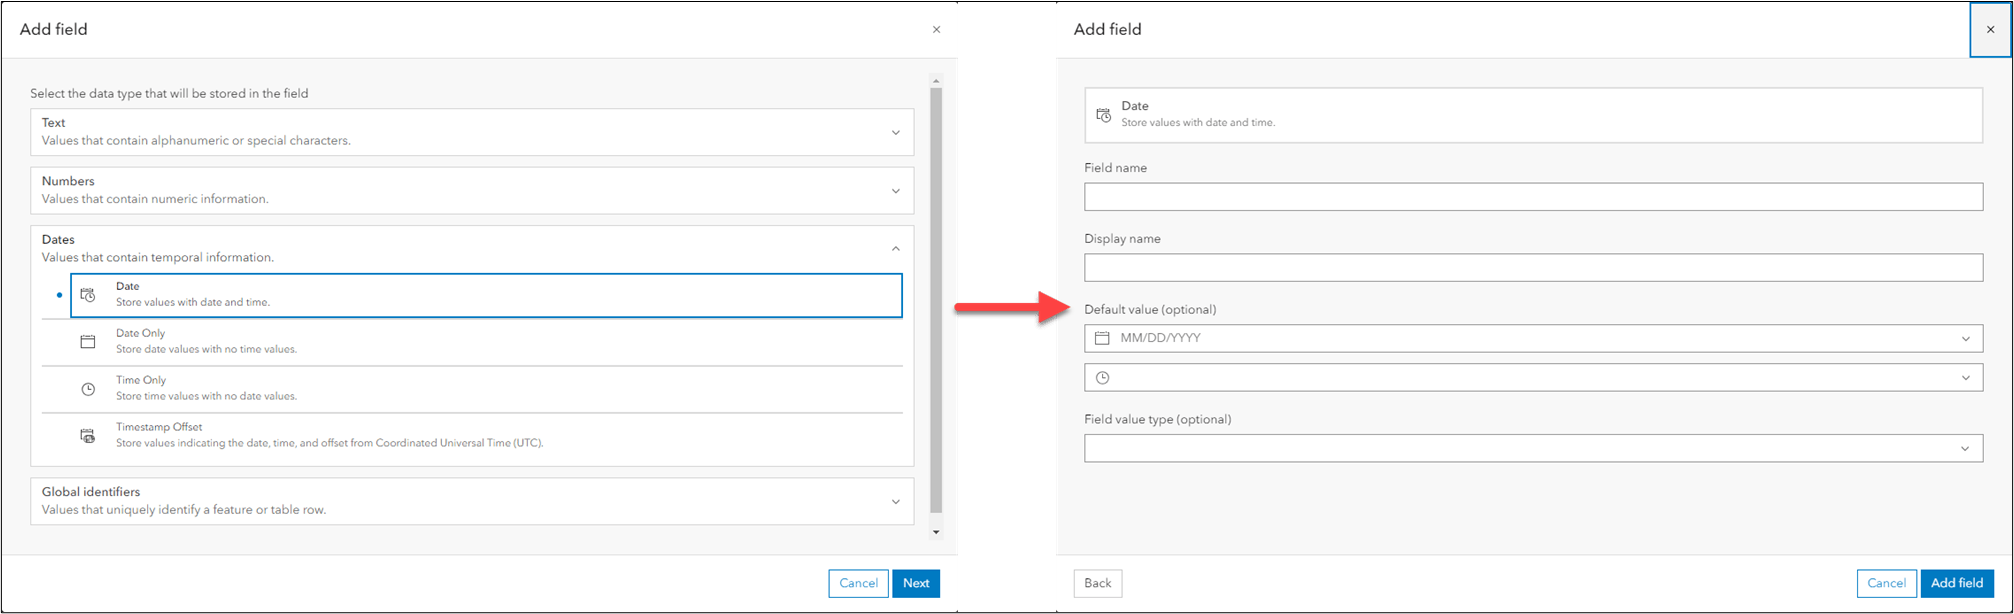 A side-by-side view of the two steps in the add field workflow. Depending on the field type chosen, the list of input parameters will dynamically change.